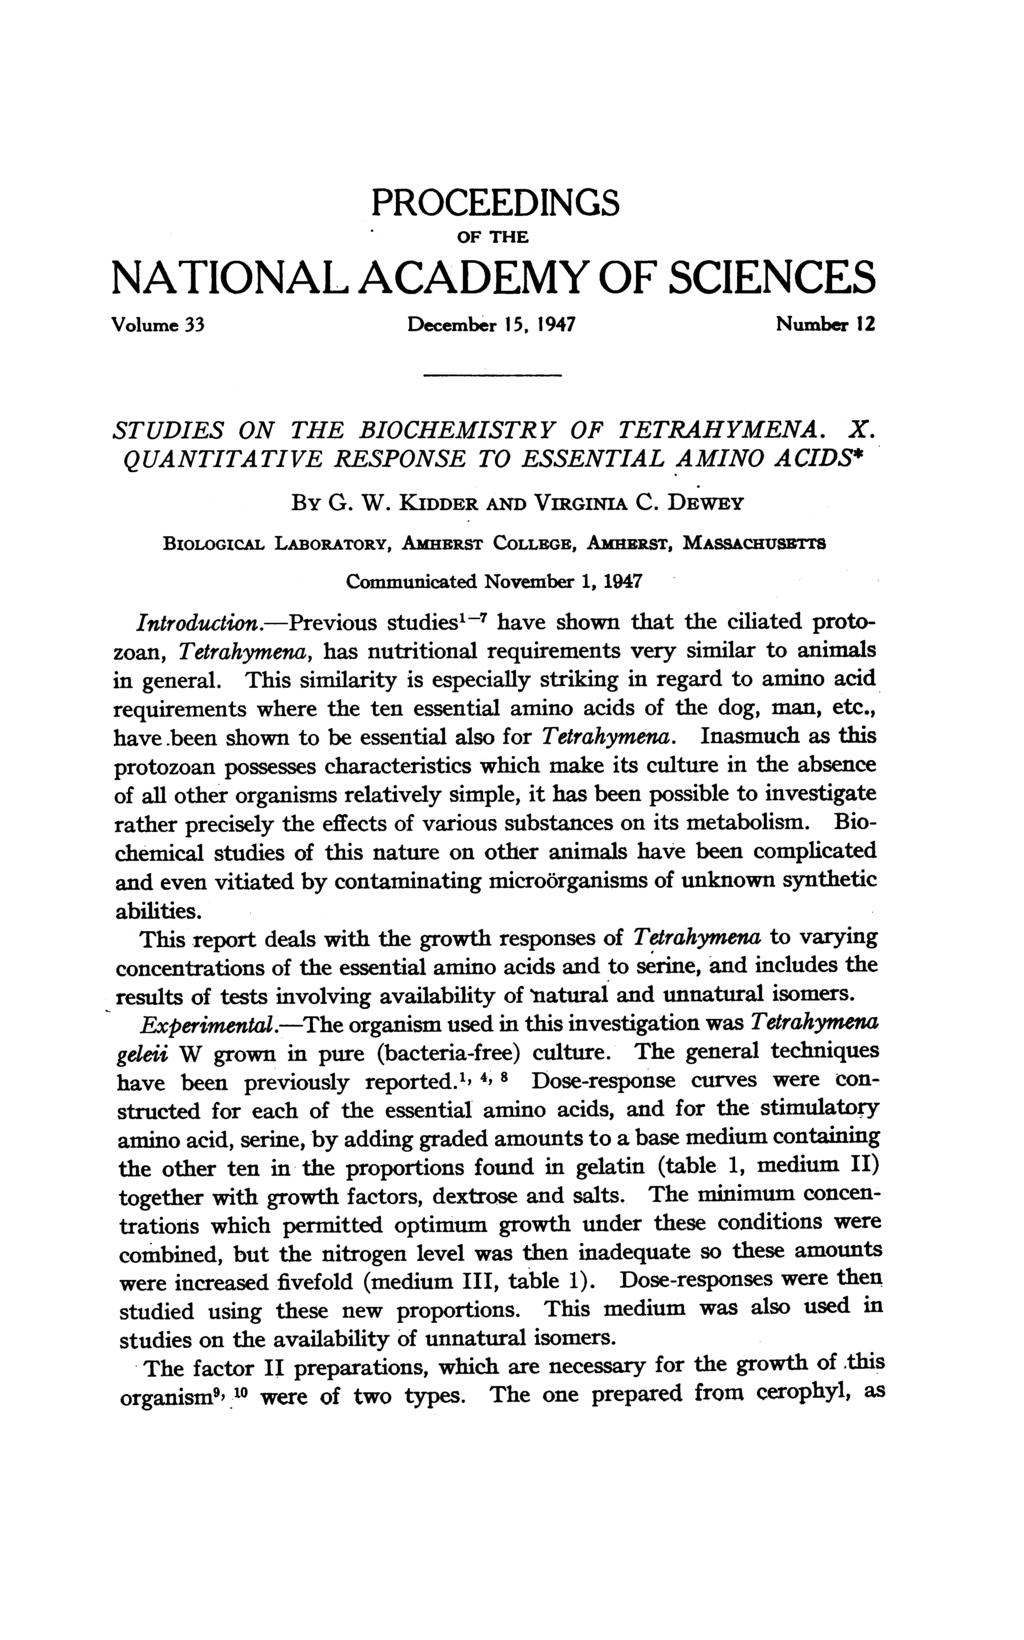 PROCEEDINGS OF THE NATIONAL ACADEMY OF SCIENCES Volume 33 December 15, 1947 Number 12 STUDIES ON THE BIOCHEMISTRY OF TETRAHYMENA. X. QUANTITATIVE RESPONSE TO ESSENTIAL AMINO ACIDS* BY G. W.